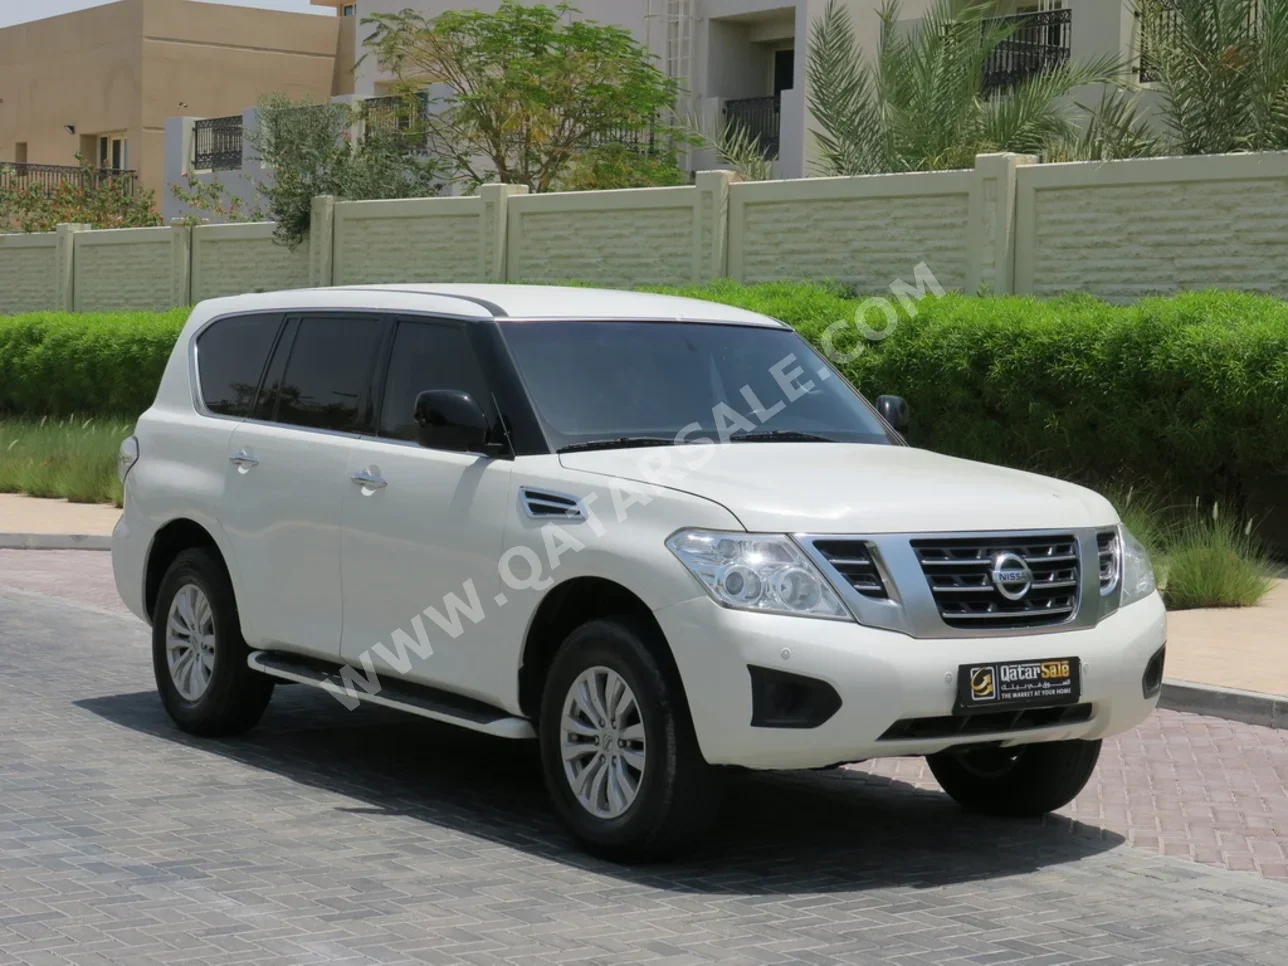 Nissan  Patrol  XE  2019  Automatic  220,000 Km  6 Cylinder  Four Wheel Drive (4WD)  SUV  White